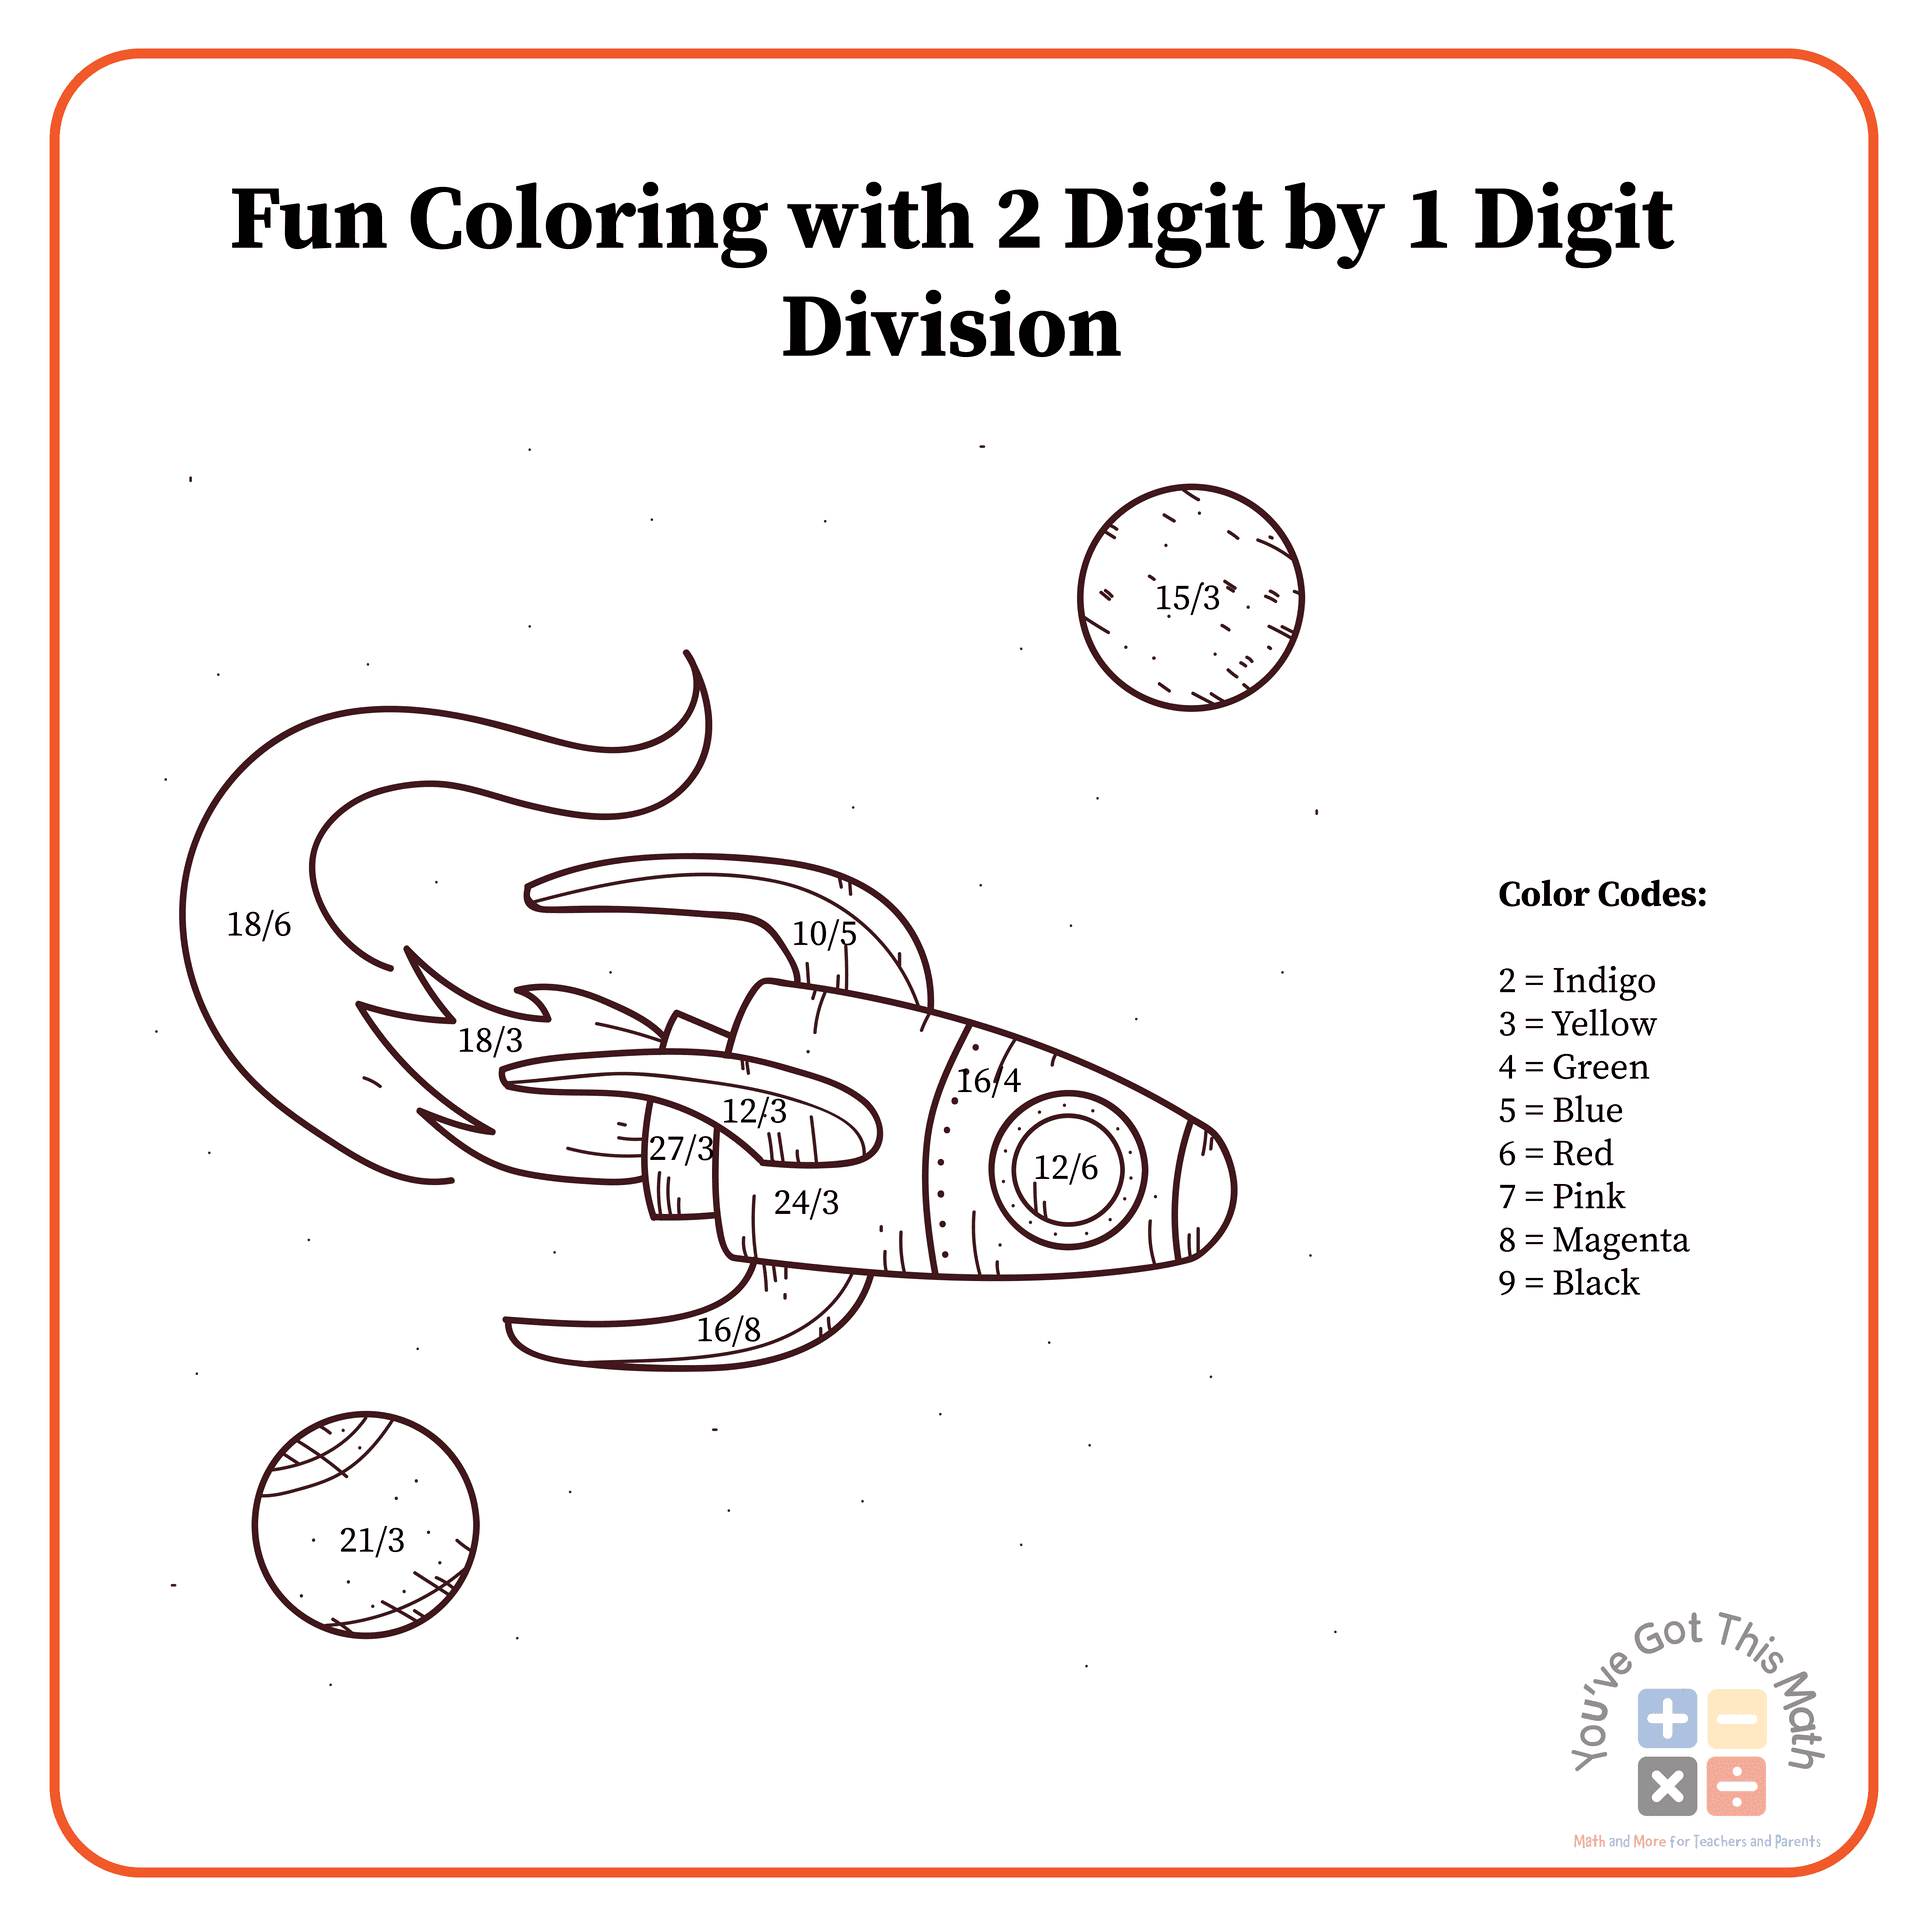 2 digit by 1 digit division in Division coloring worksheets